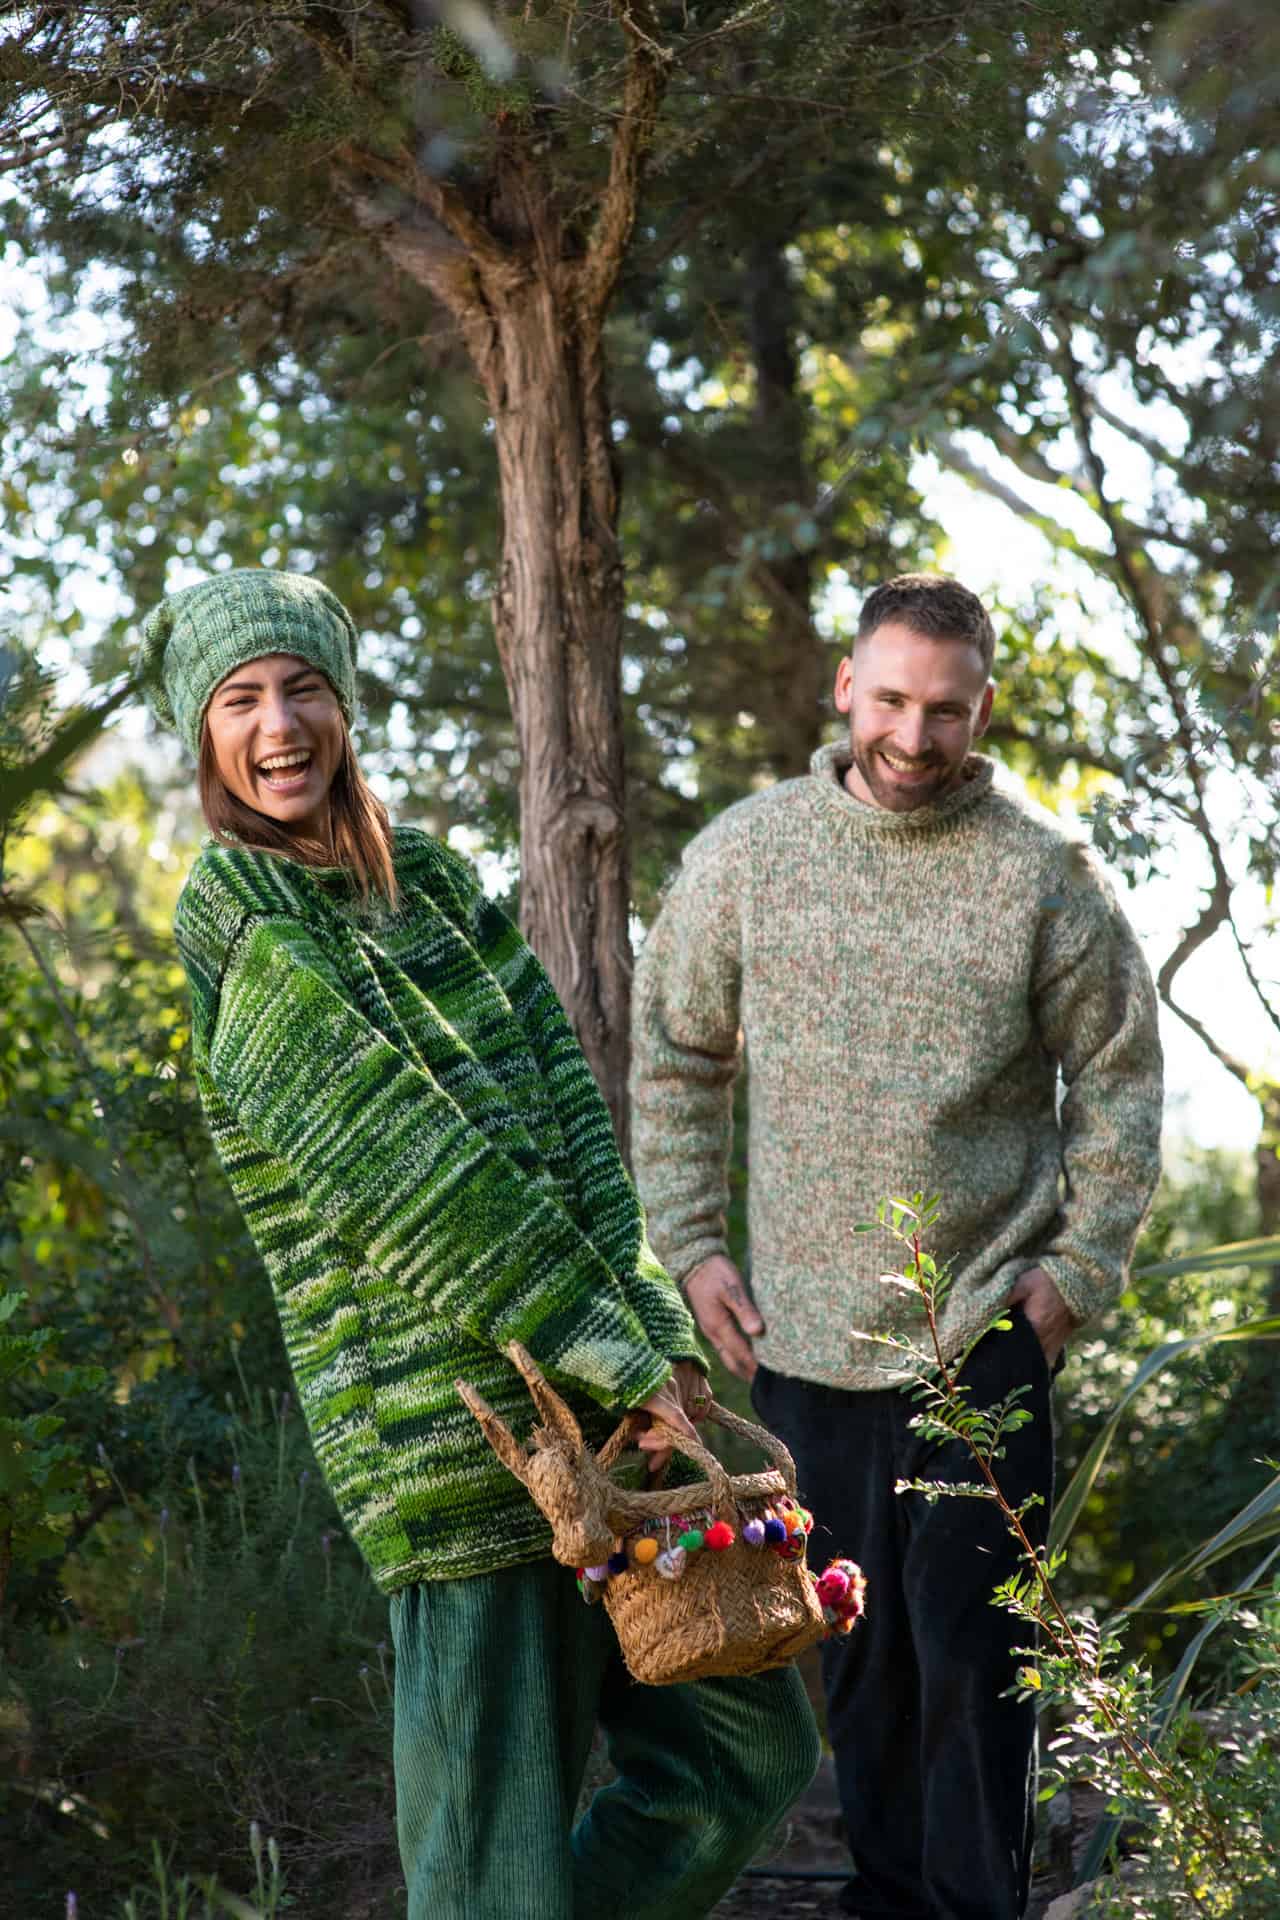 Models wear matching corduroy trousers and matching woolly jumpers in a garden